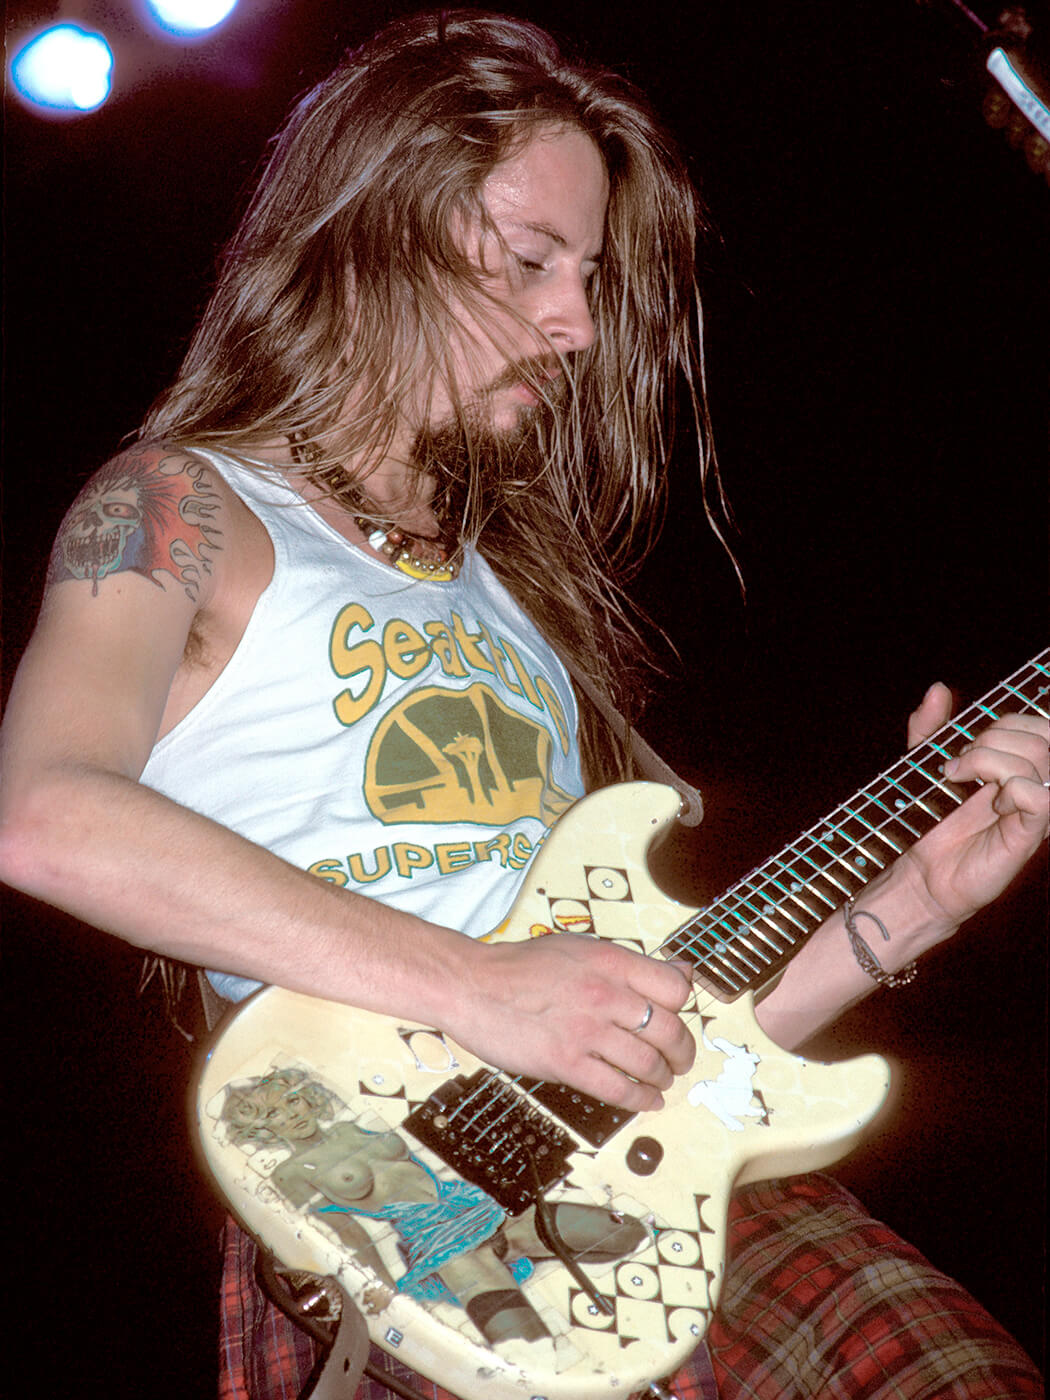 Jerry Cantrell performing with his “Blue Dress” G&L Rampage guitar in 1991, photo by John Atashian via Getty Images